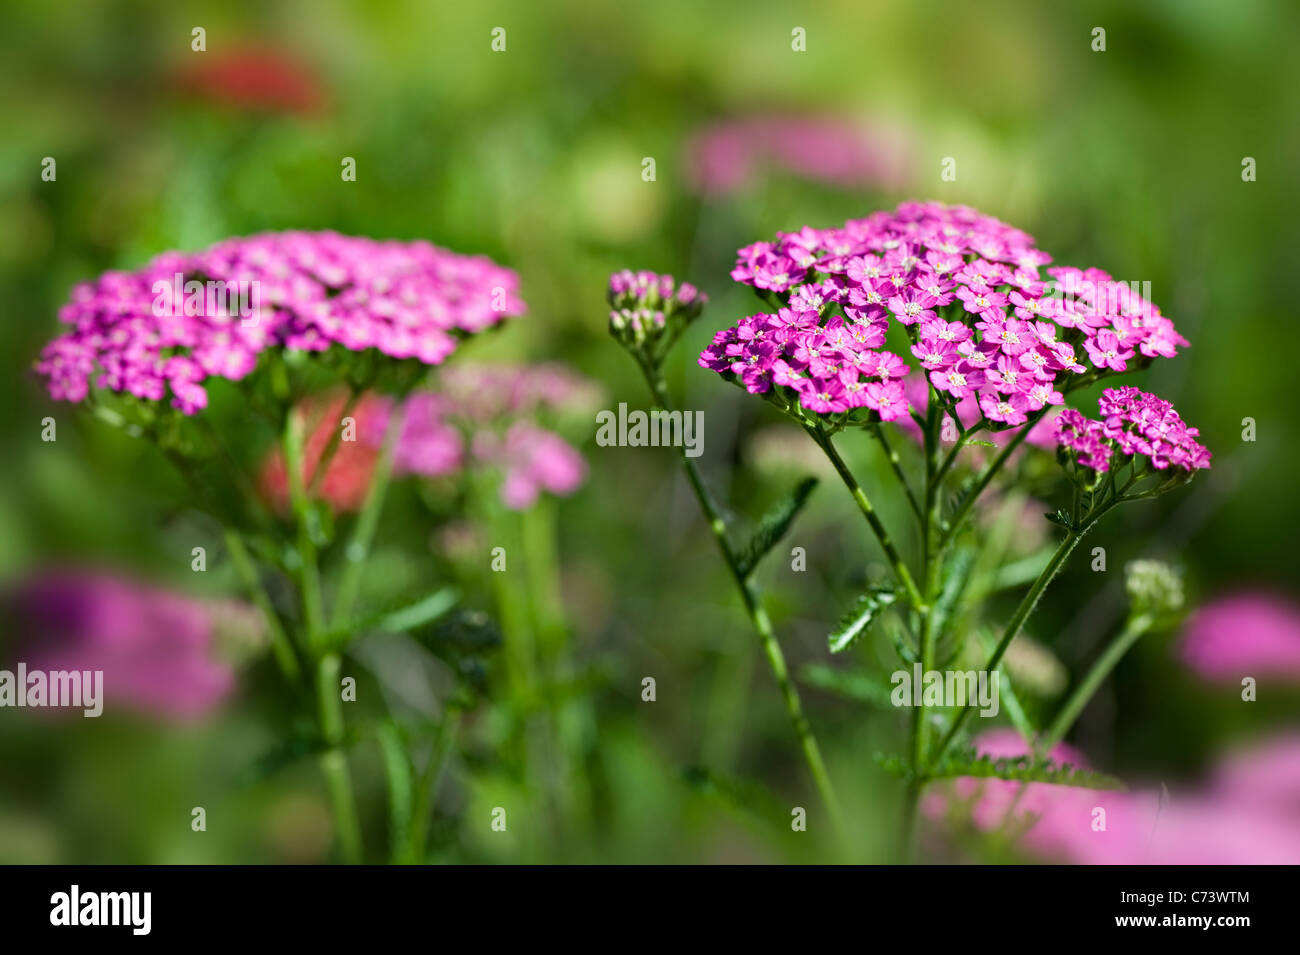 Close-up image of the summer flowering, pink Achillea millefolium 'Pretty Belinda', commonly known as yarrow or common yarrow. Stock Photo